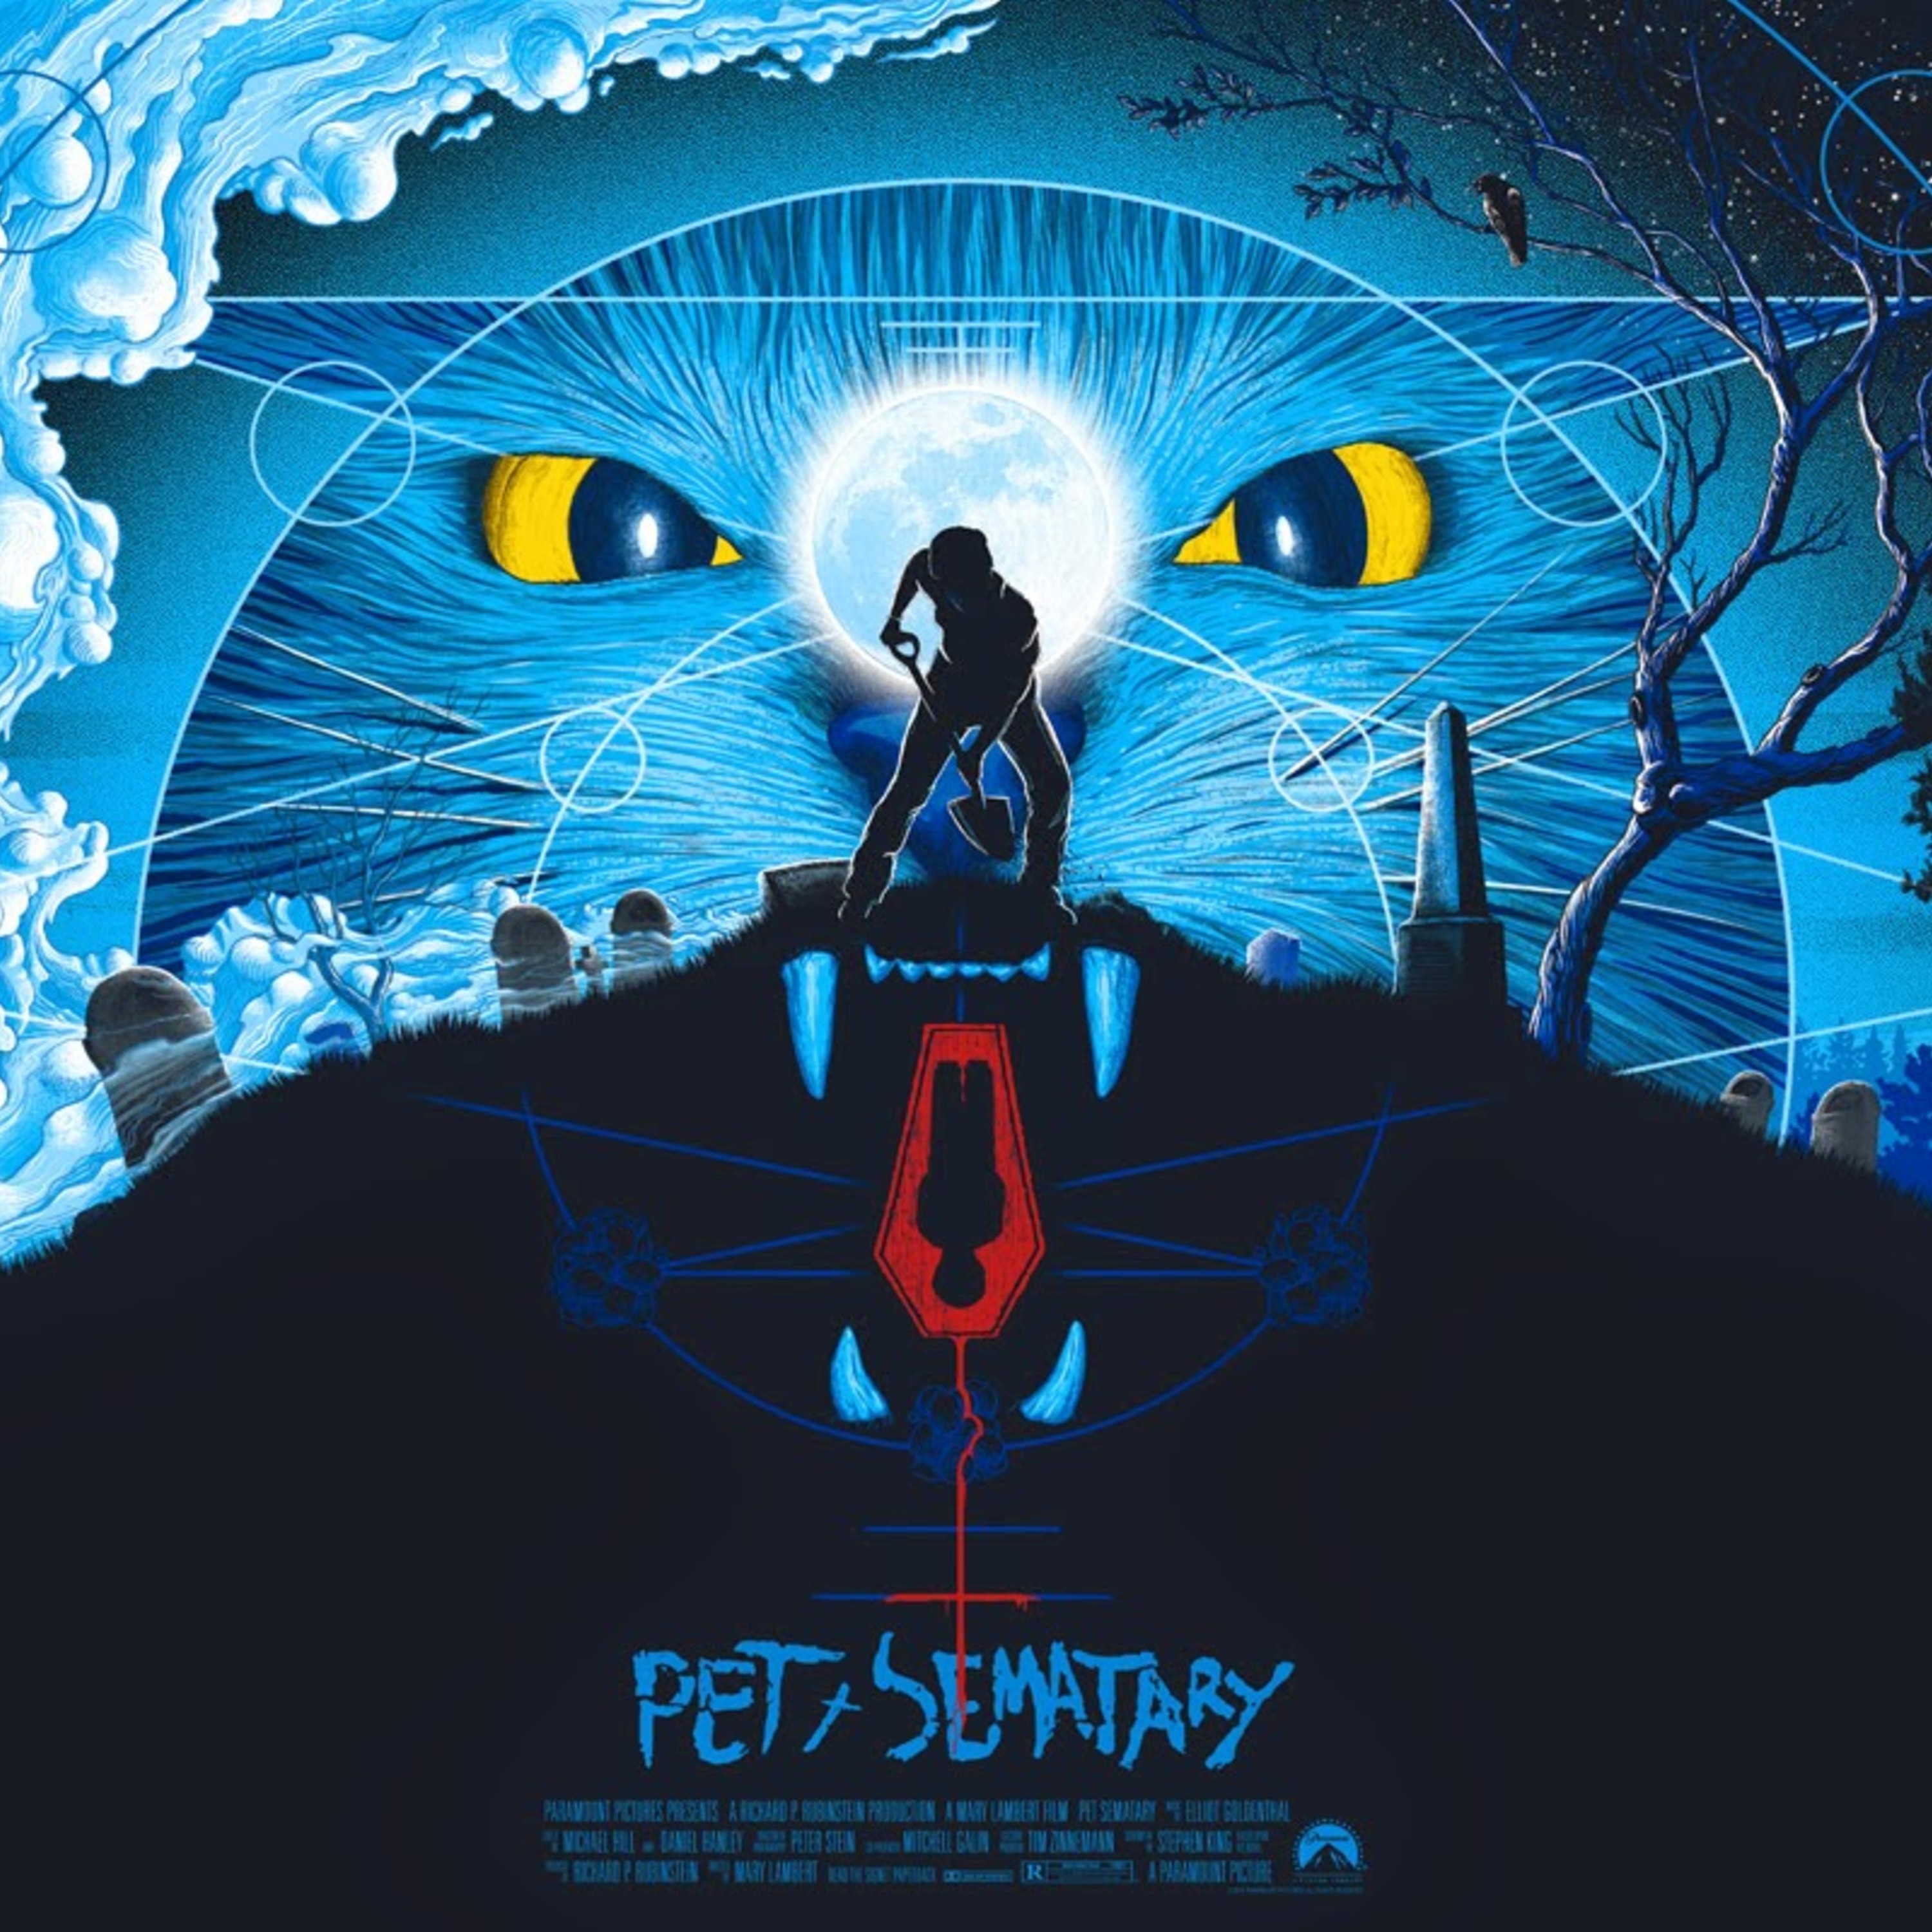 Episode 1: Pet Sematary by Stephen King